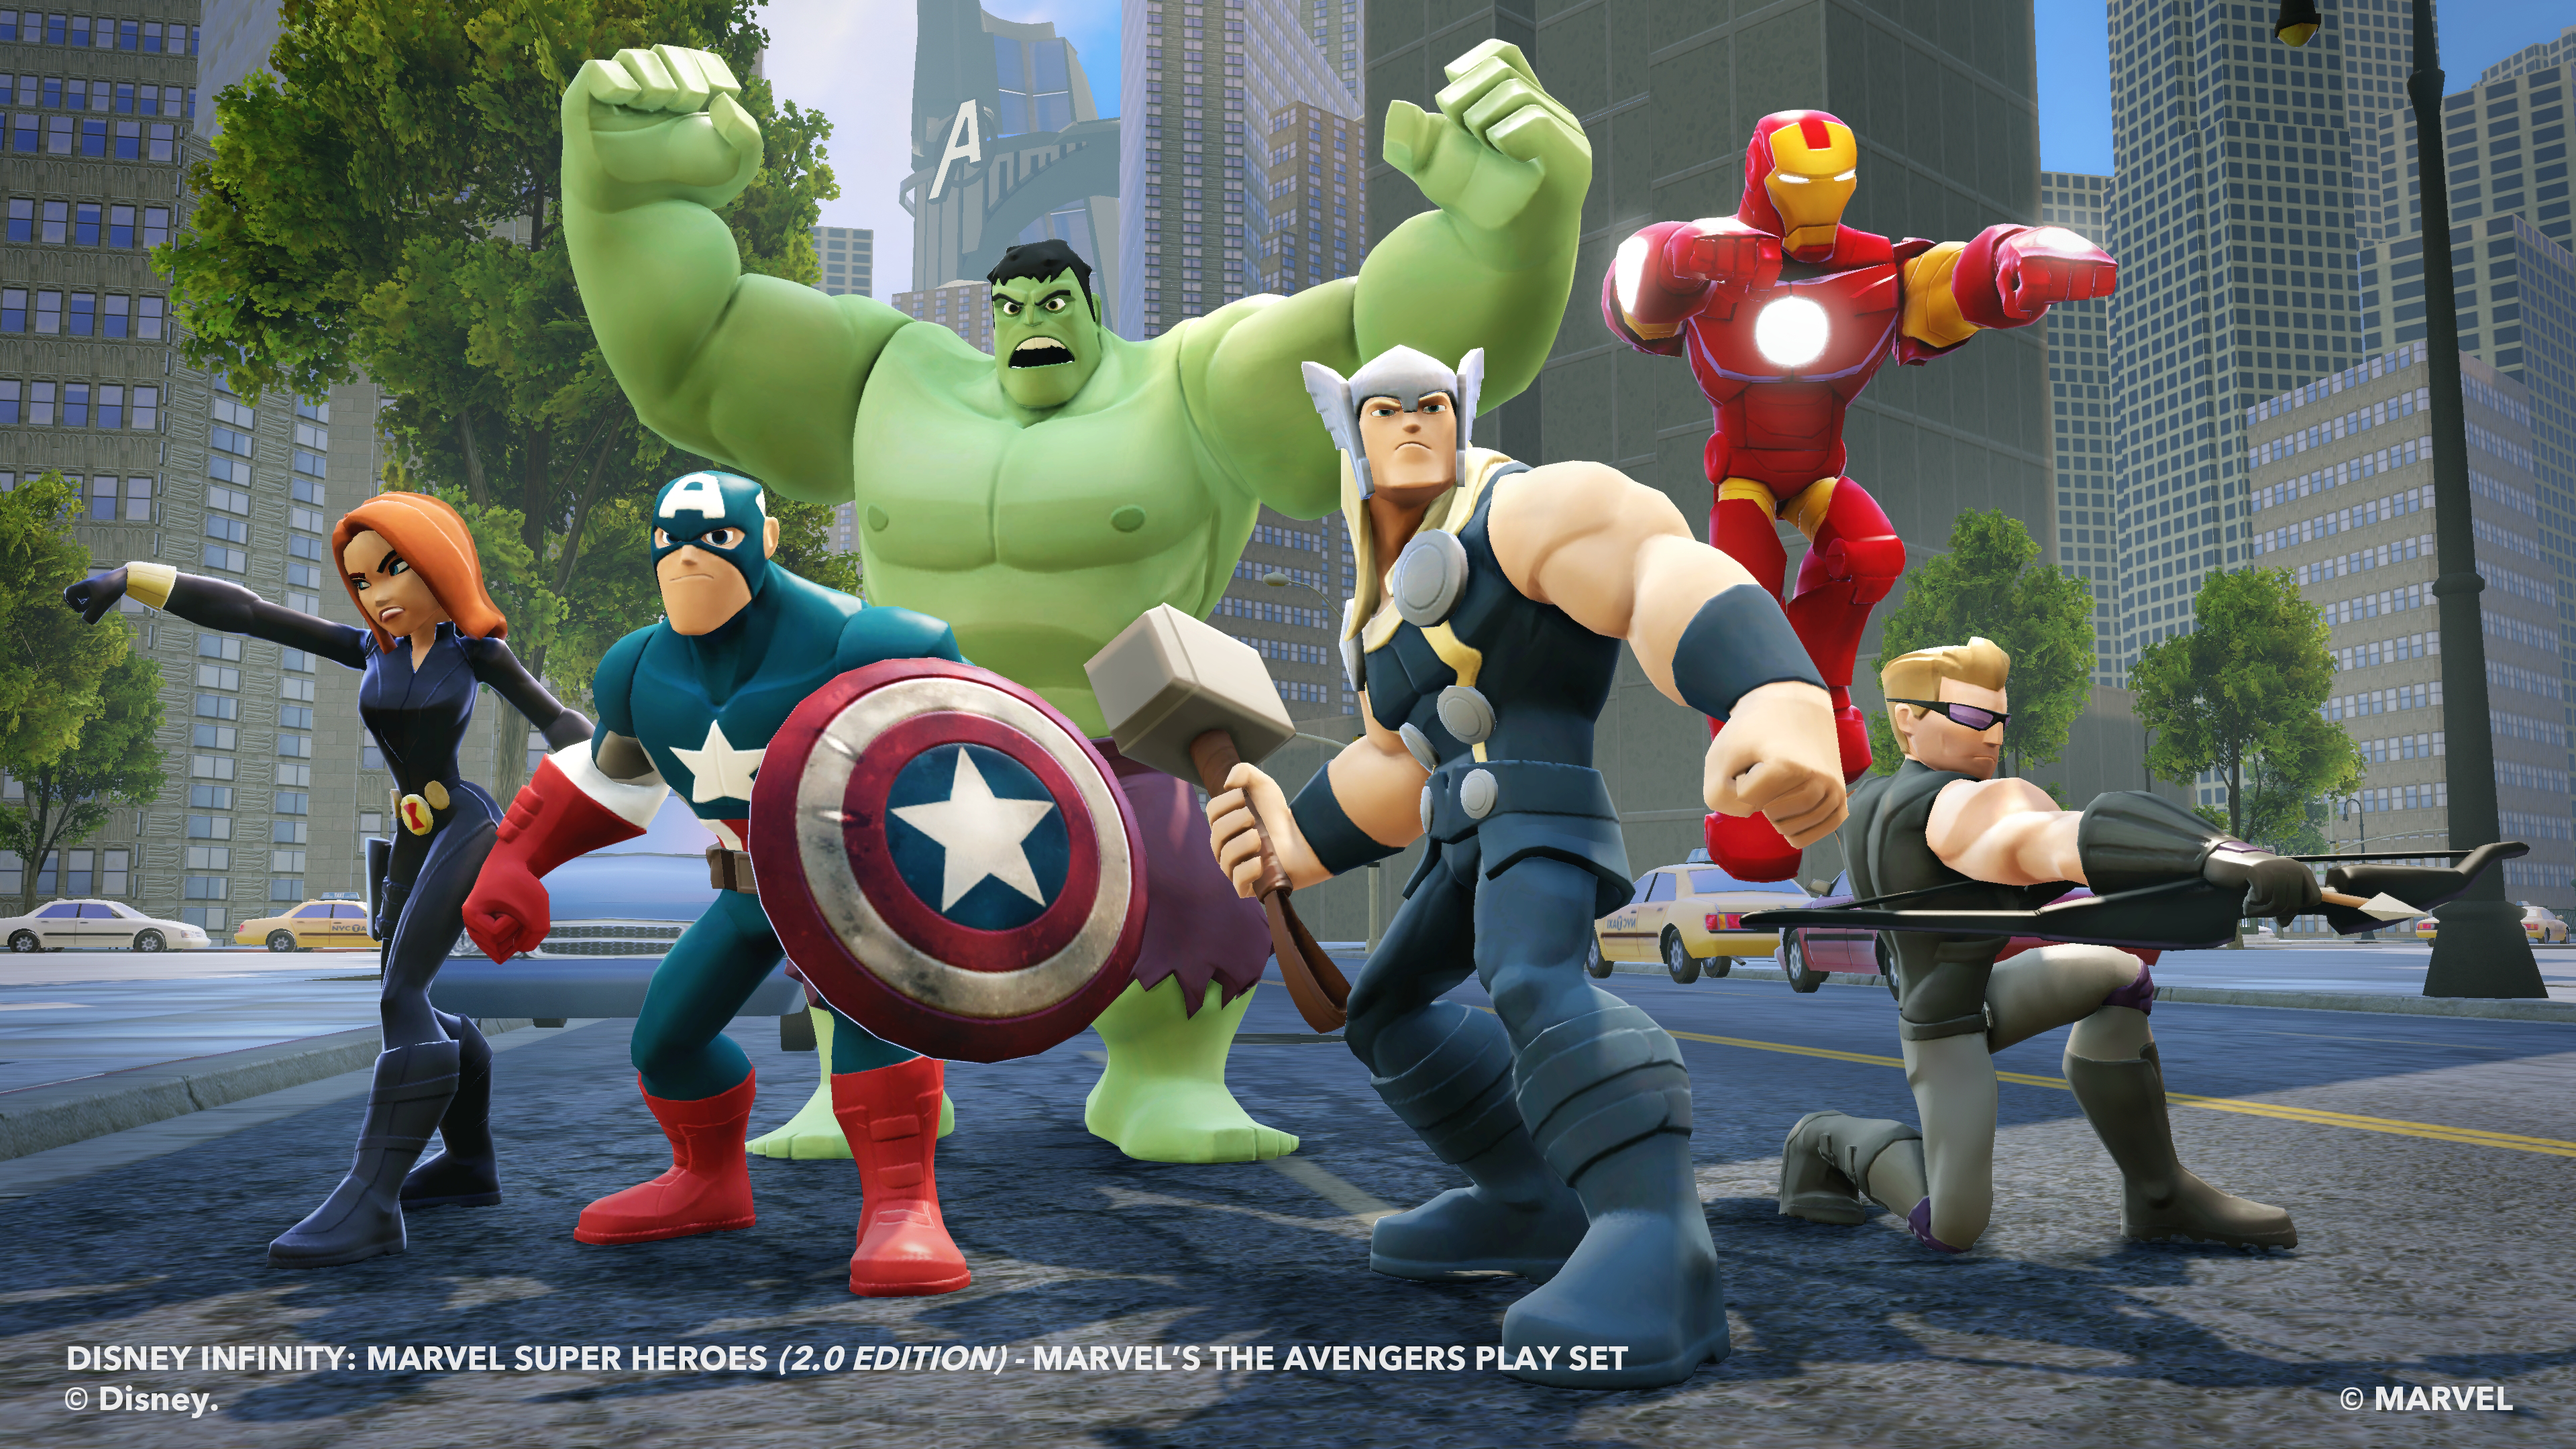 Disney Infinity: Marvel Super Heroes Hints At A World Of Endless Expansion  | TechCrunch